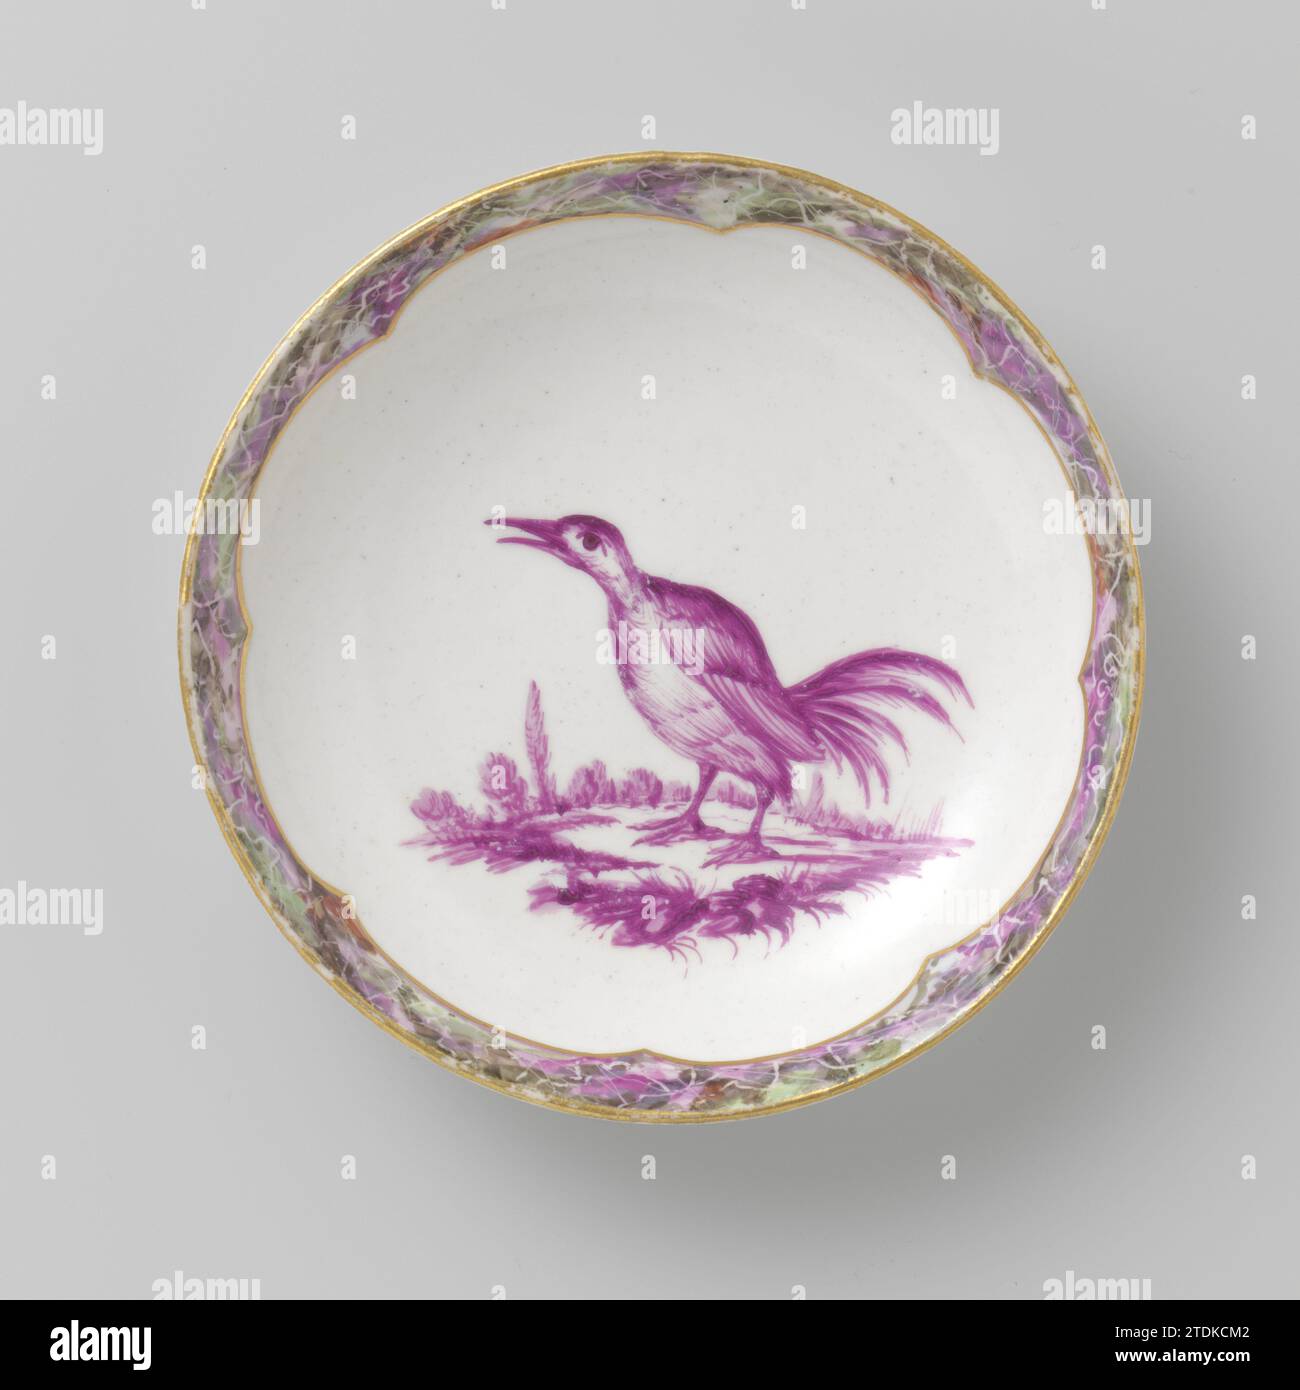 Cup and Saucer, Manufactuur Oud-Loosdrecht, c. 1778 - c. 1782 Porcelain dish. Painted in beet red with a bird on a ground. Along the edges, a grabbed stock -locked stock in beet red, green, gray -brown and red. Golden piping along the dish. Loosdrecht porcelain Porcelain dish. Painted in beet red with a bird on a ground. Along the edges, a grabbed stock -locked stock in beet red, green, gray -brown and red. Golden piping along the dish. Loosdrecht porcelain Stock Photo